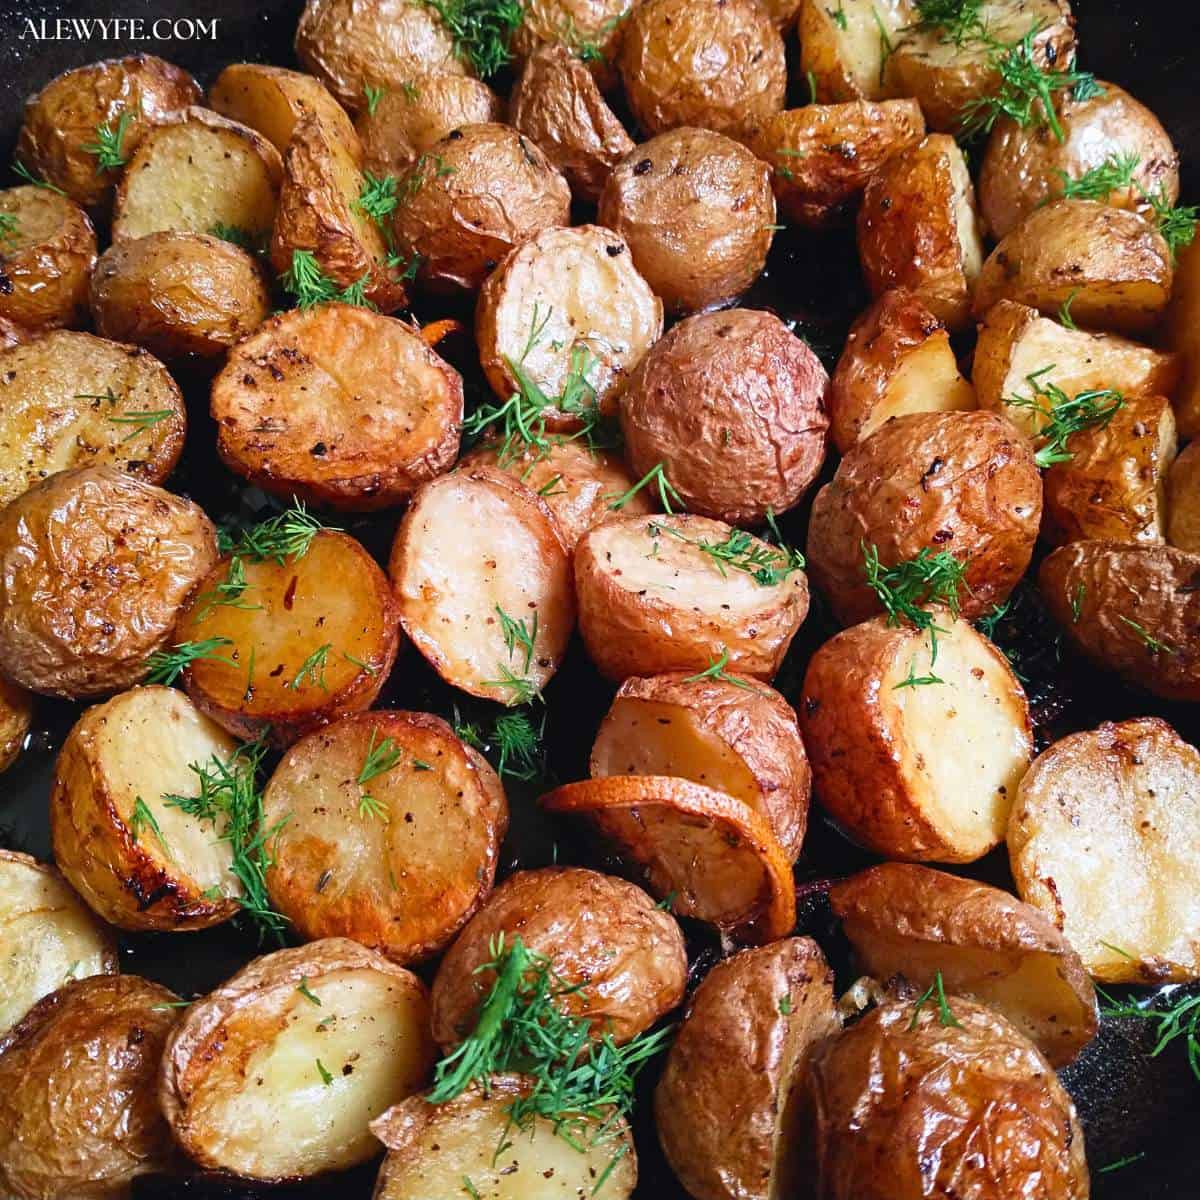 golden brown roasted potatoes with fresh dill and lemon slices in a cast iron pan